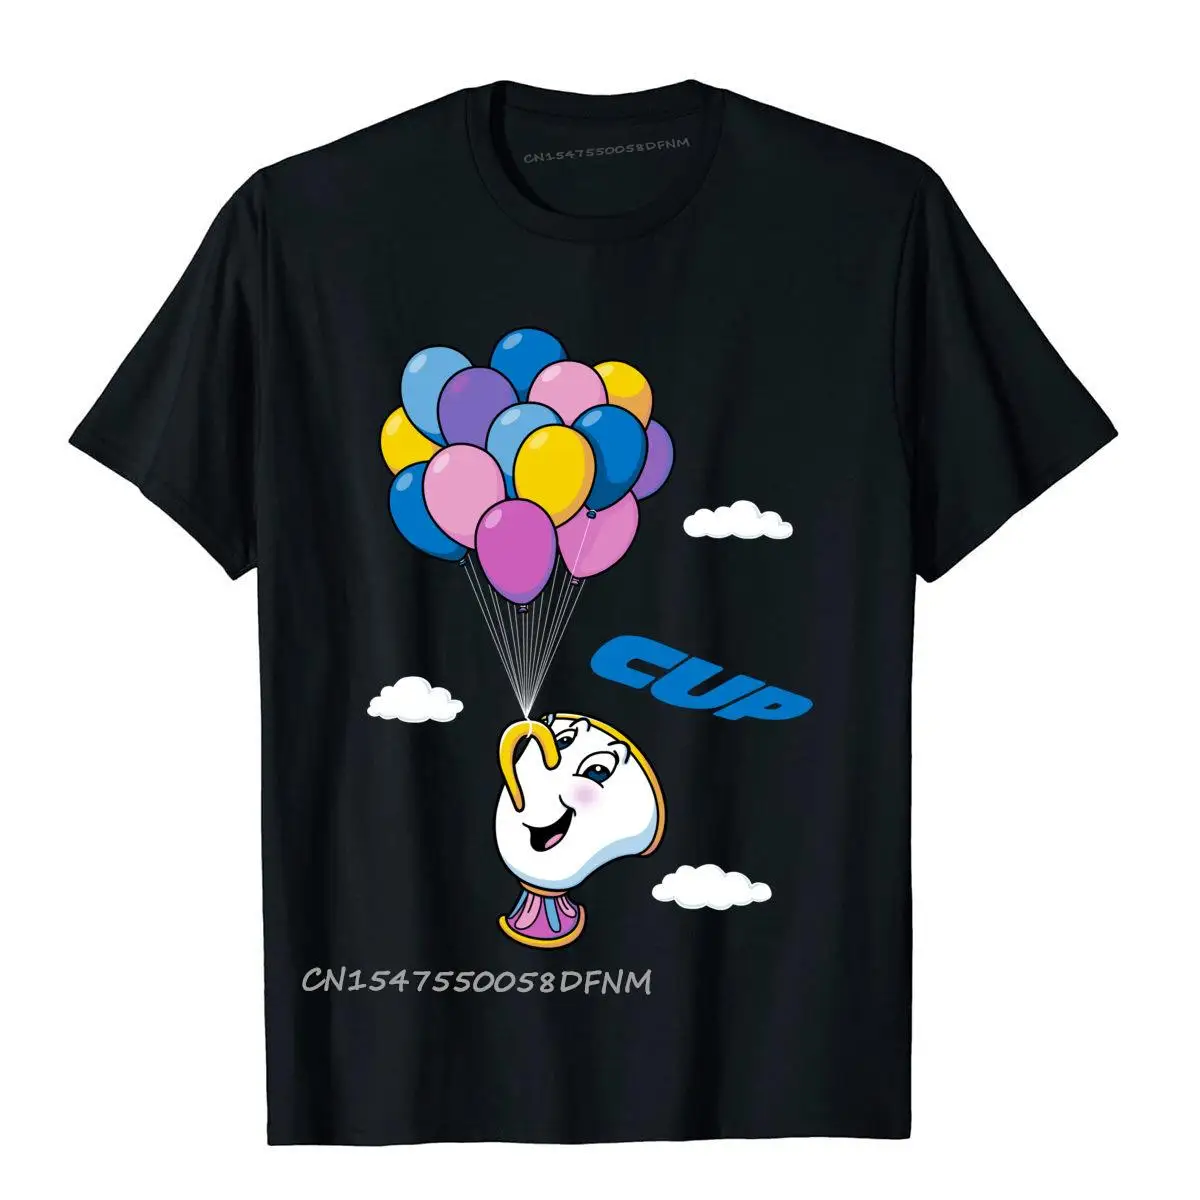 

Cup Gothic Cuphead Balloon T-shirts New Coming Premium Cotton Men T Shirts Summer Short Sleeve 3D Printed Slim Fit Tshirt